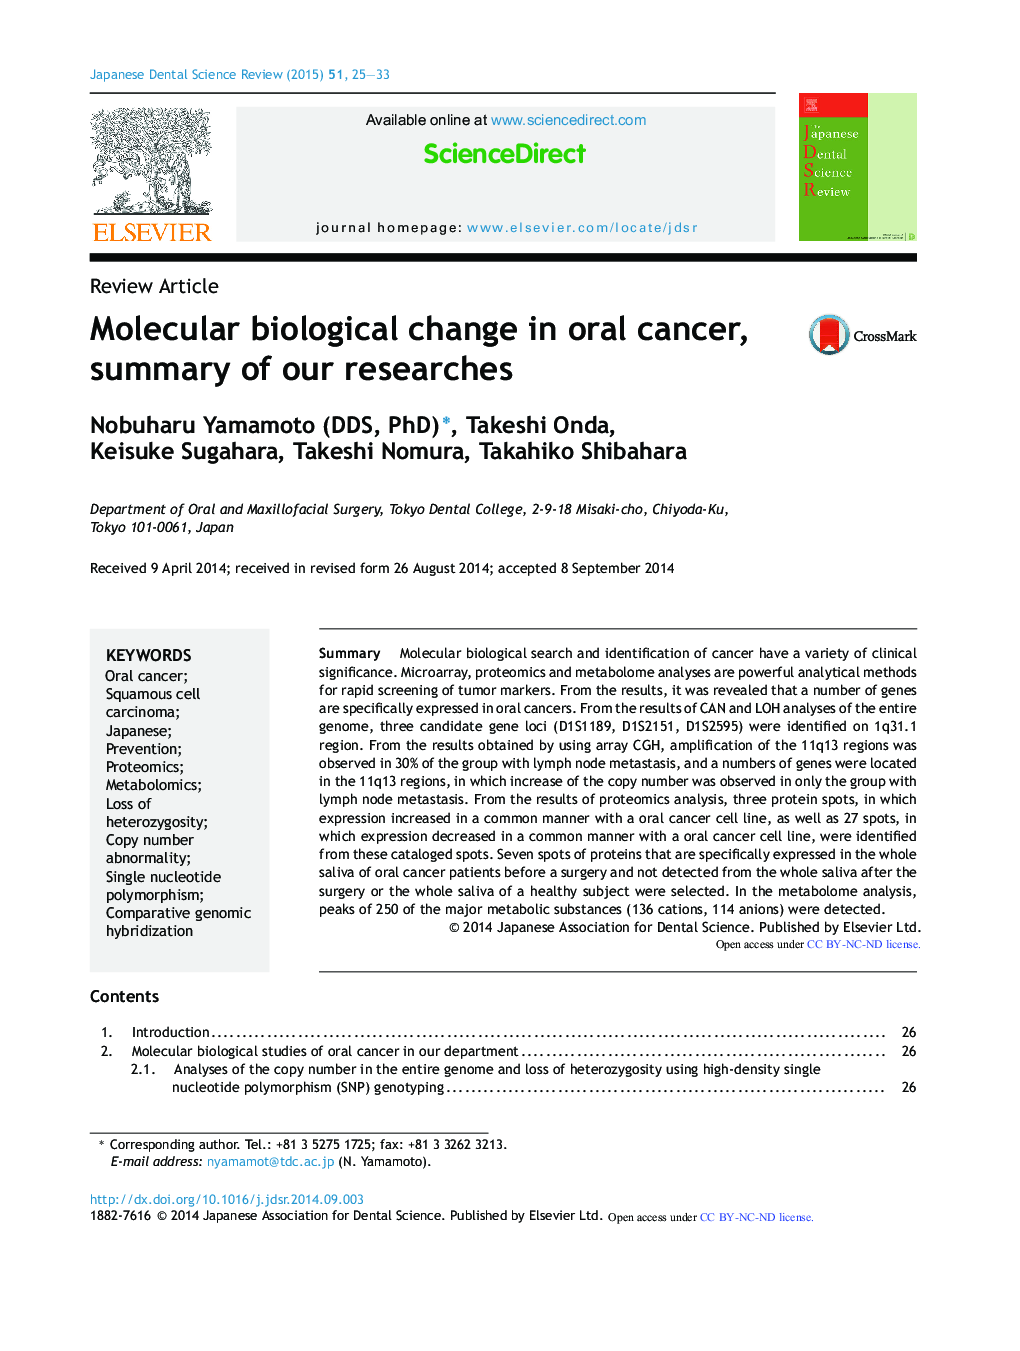 Molecular biological change in oral cancer, summary of our researches